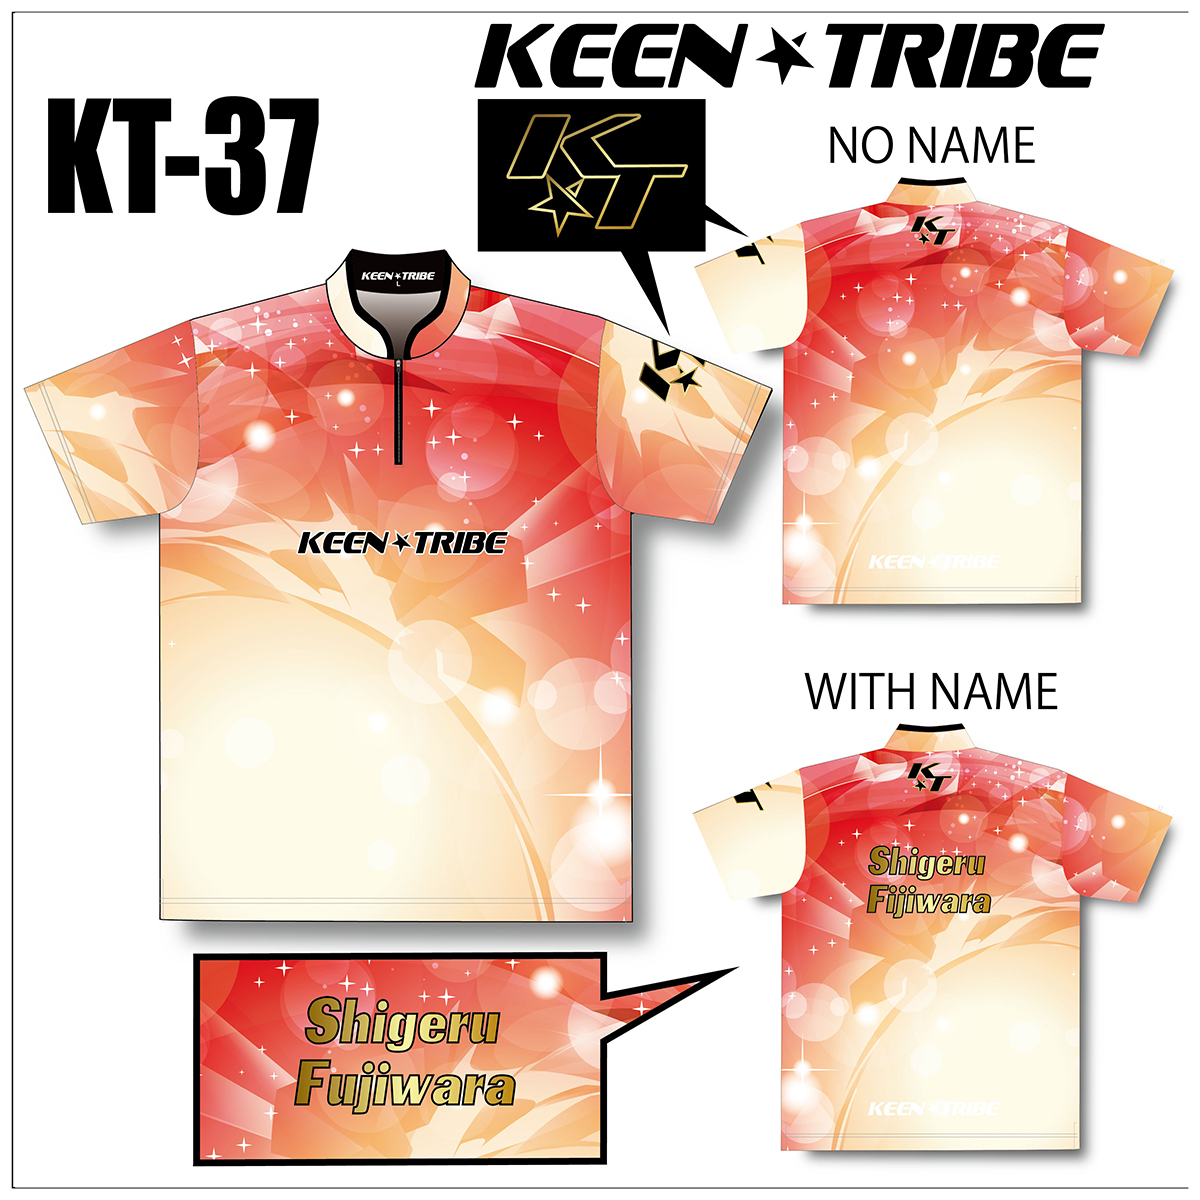 KEEN ★ TRIBE　KT-37(受注生産)